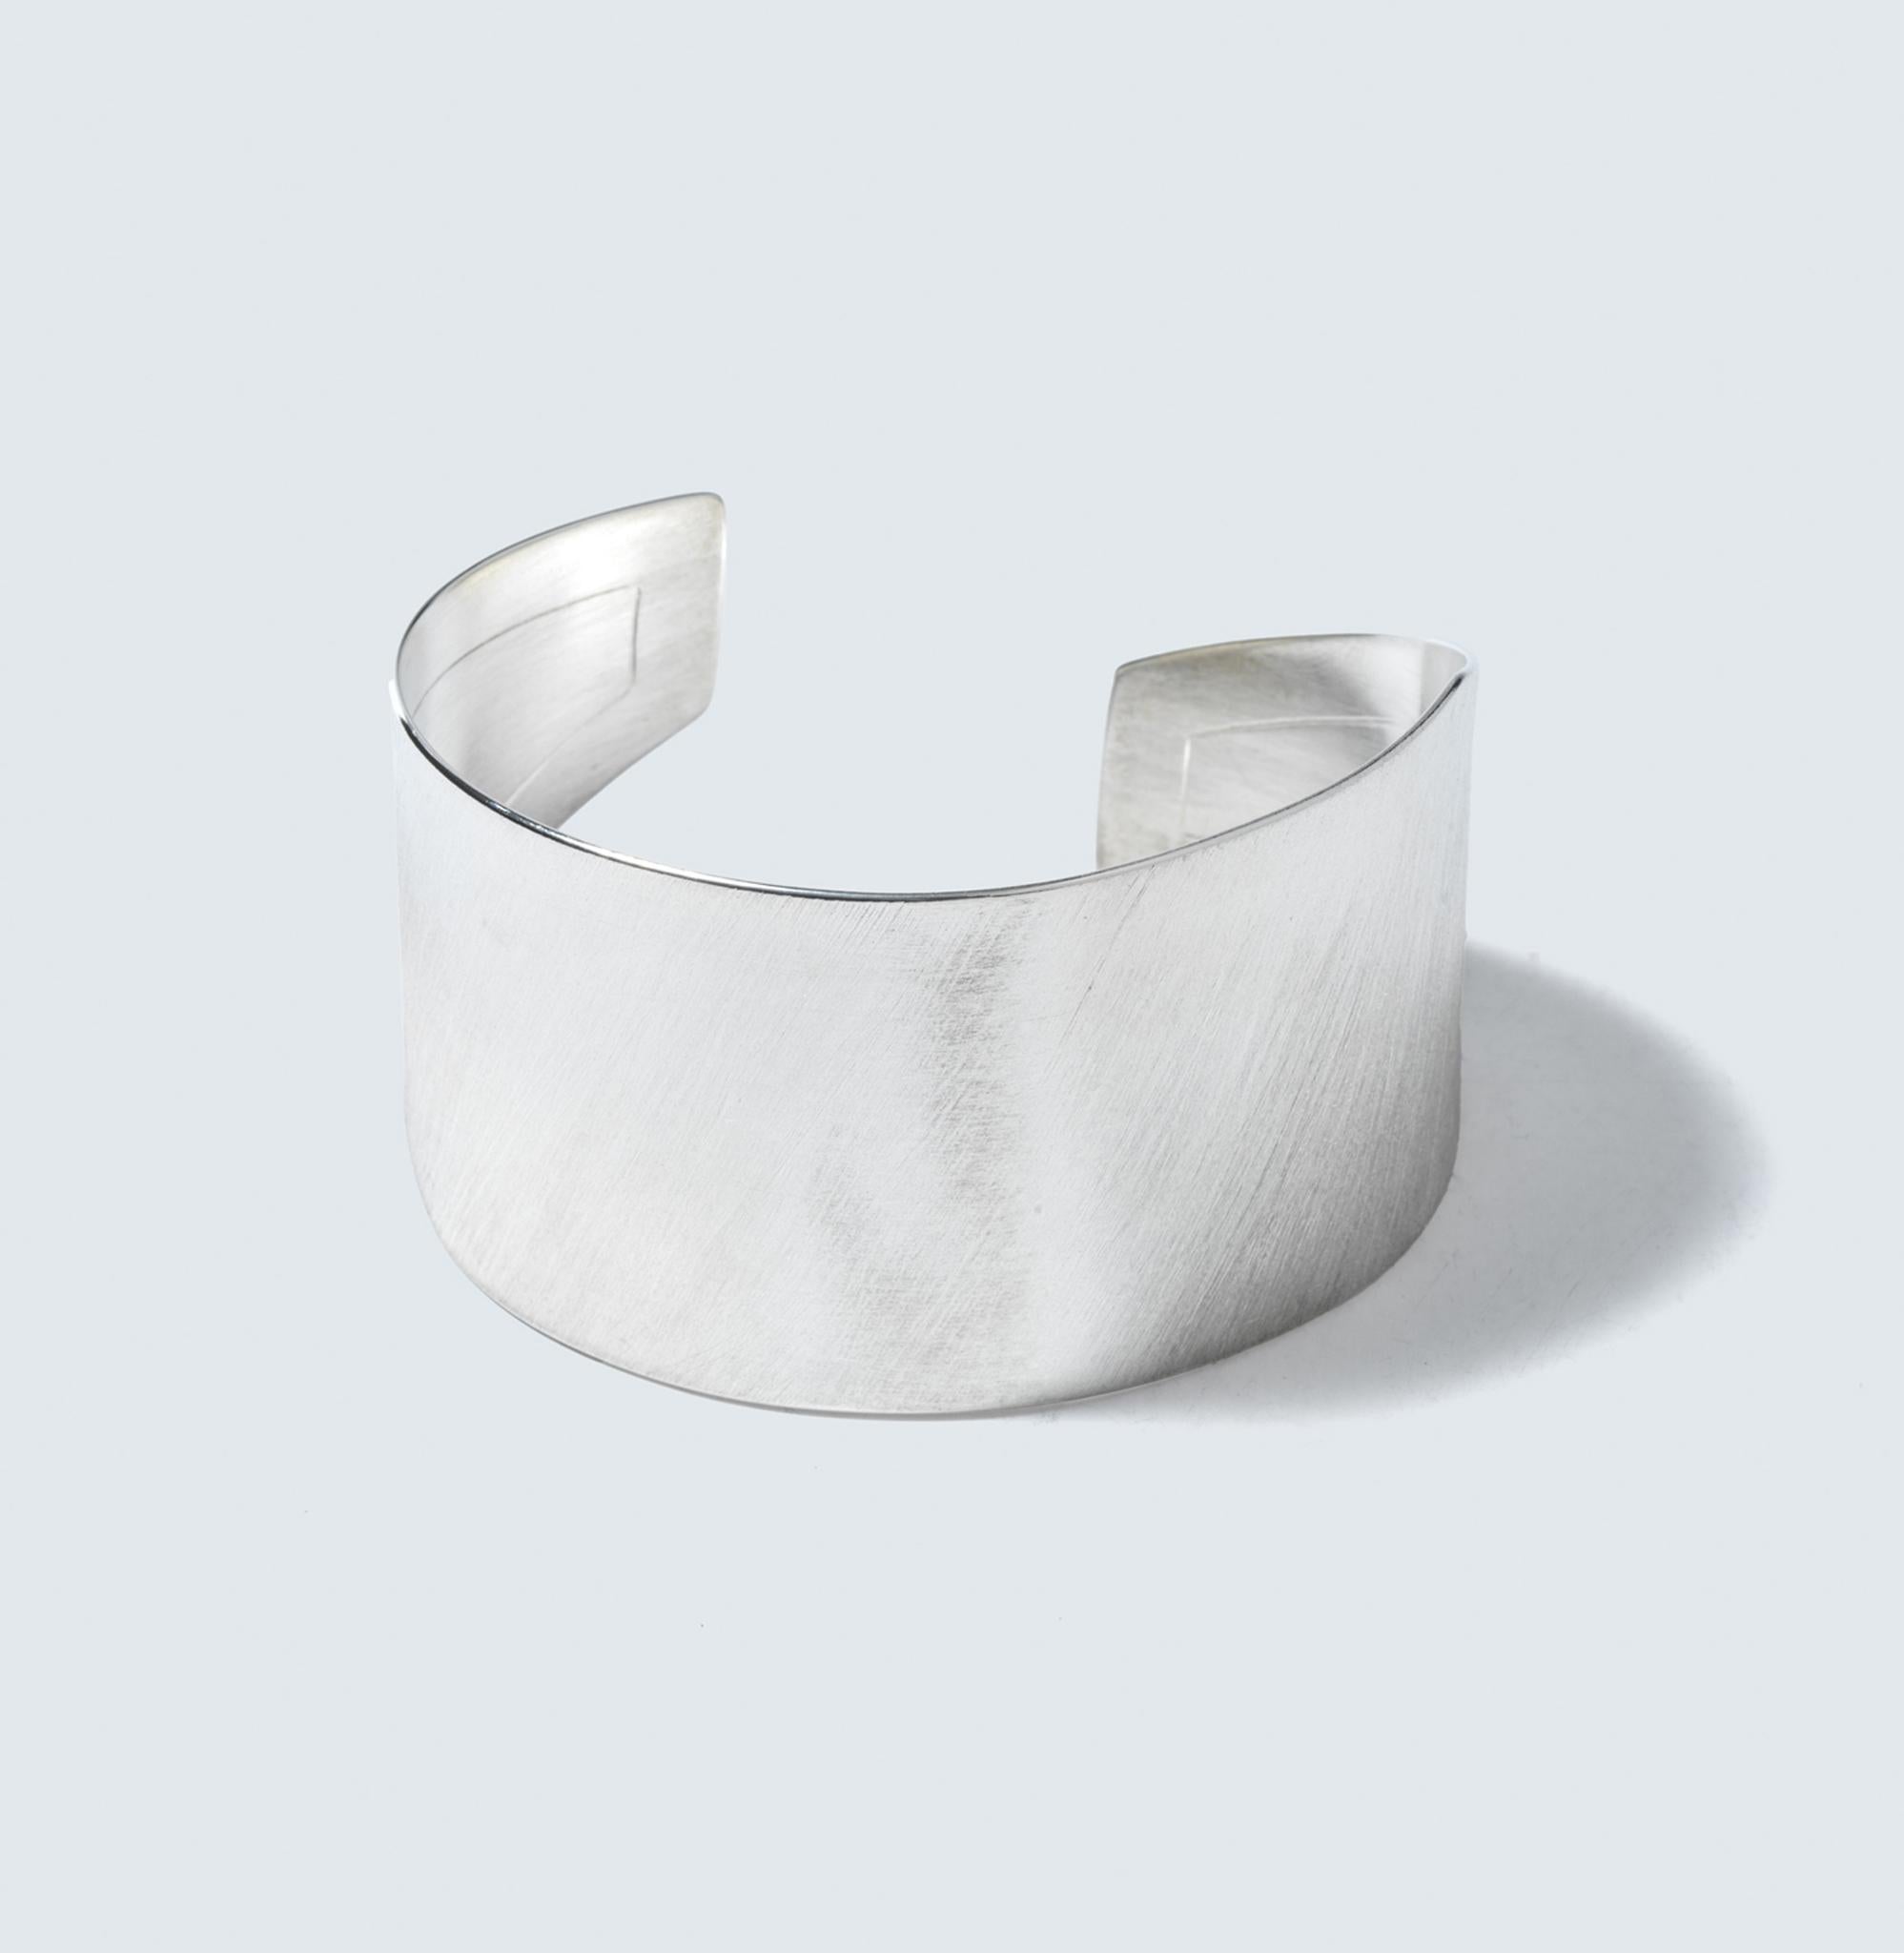 This is a sleek sterling silver bracelet with a broad, curved band. The surface of the bracelet is brushed, giving it a textured appearance that softly diffuses light. It has a satin-like luster that subtly catches the eye without being overly